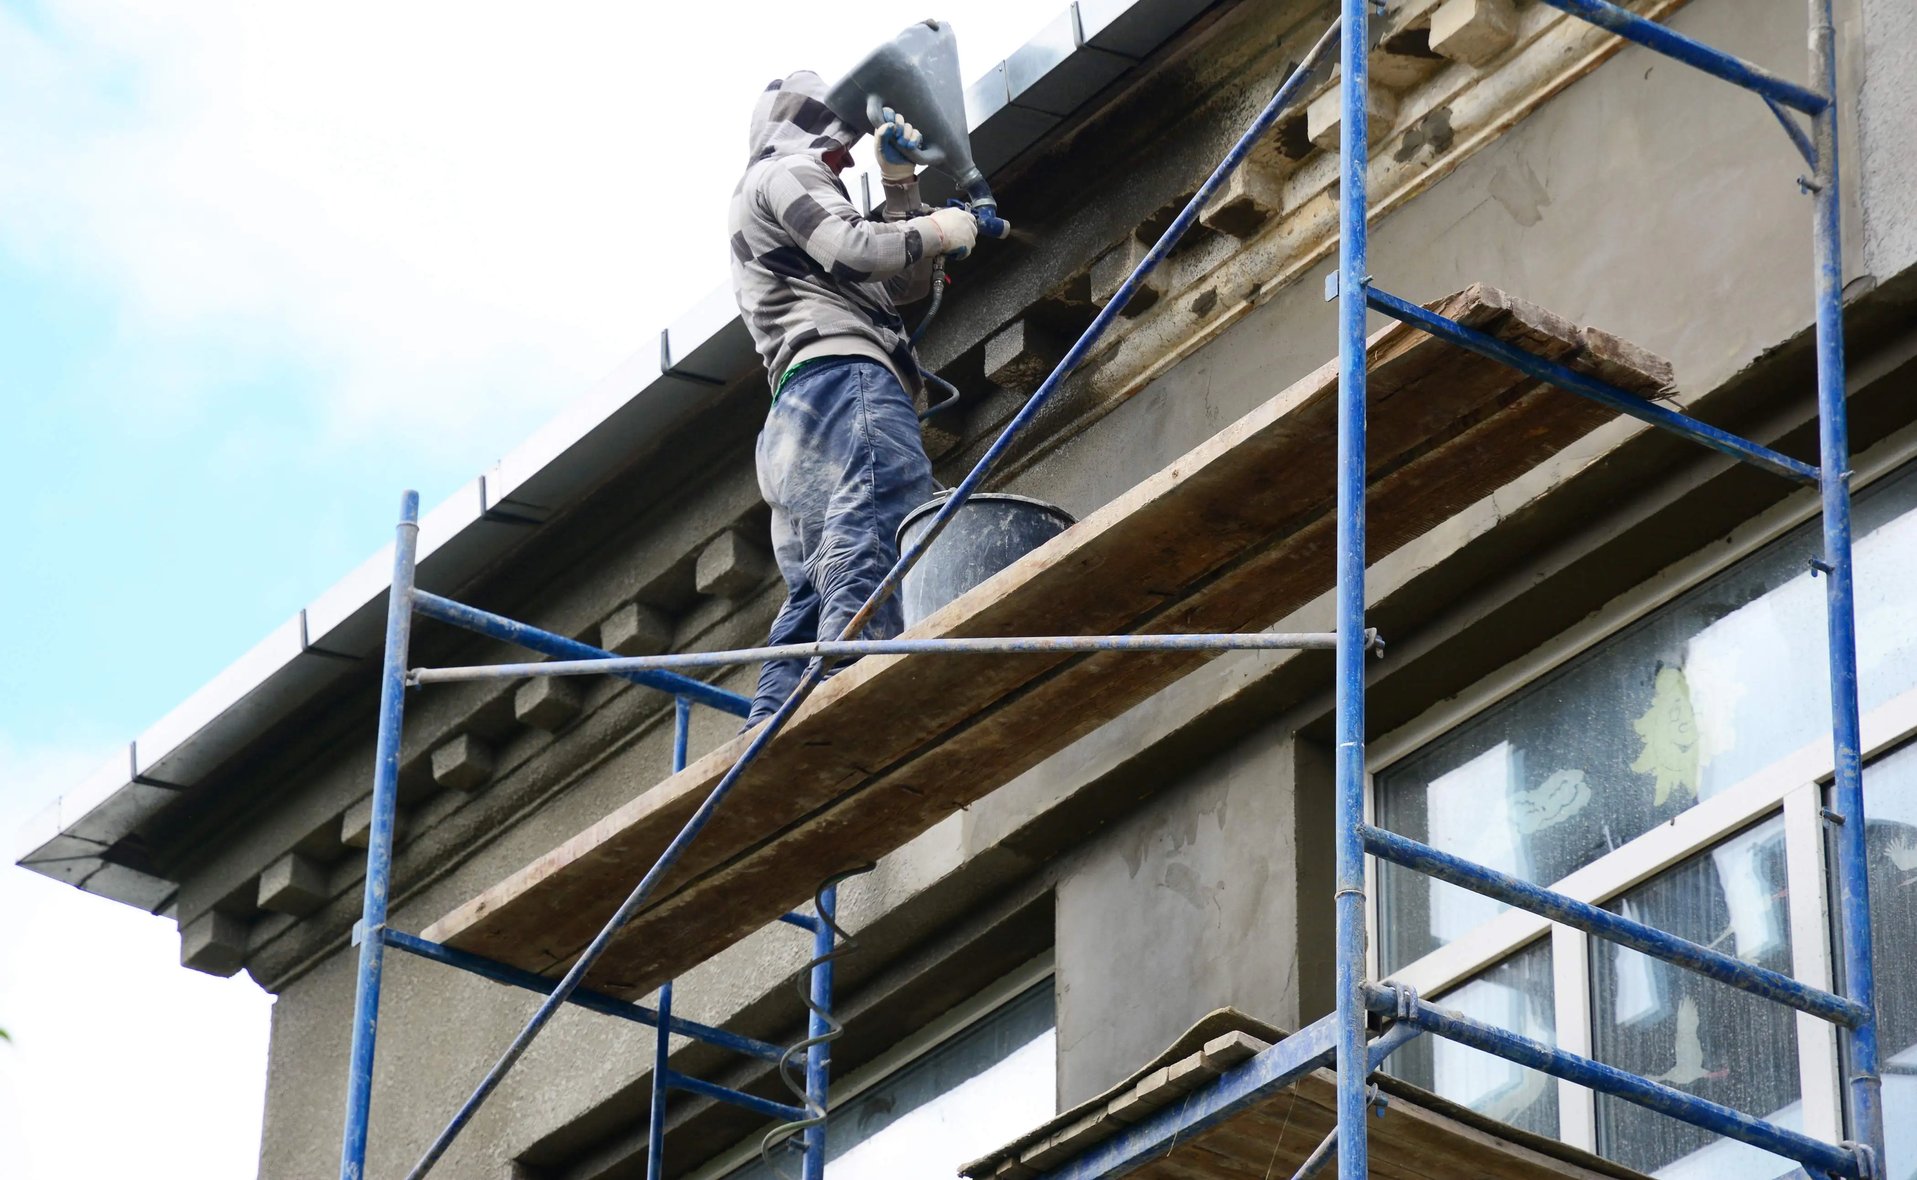 Worker on scaffolding performing stucco remediation on a building facade in Philadelphia.